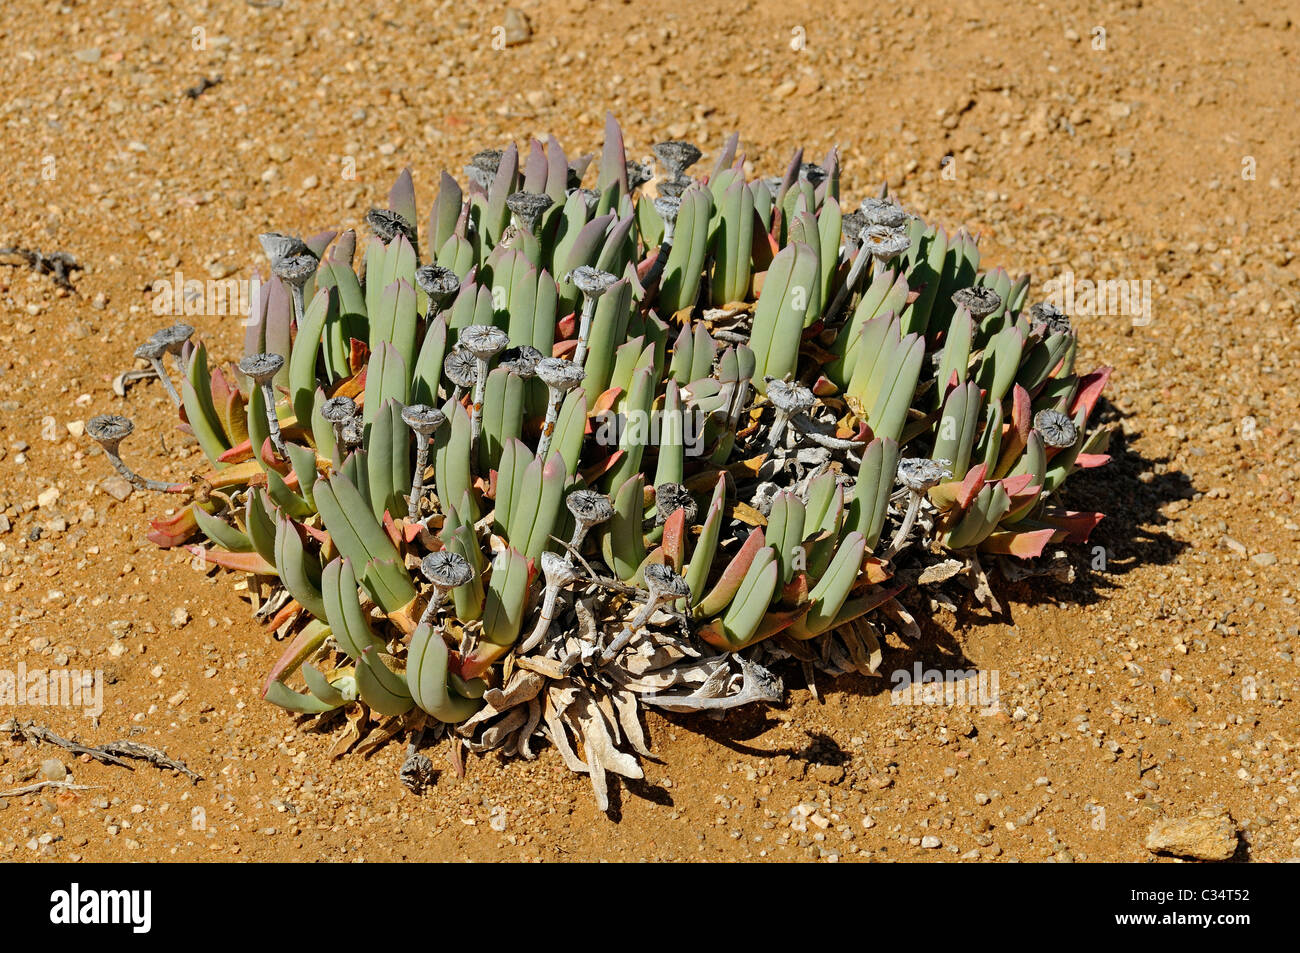 Cheiridopsis sp. in habitat, Aizoaceae, Mesembs, Goegap Nature Reserve, Namaqualand, South Africa Stock Photo